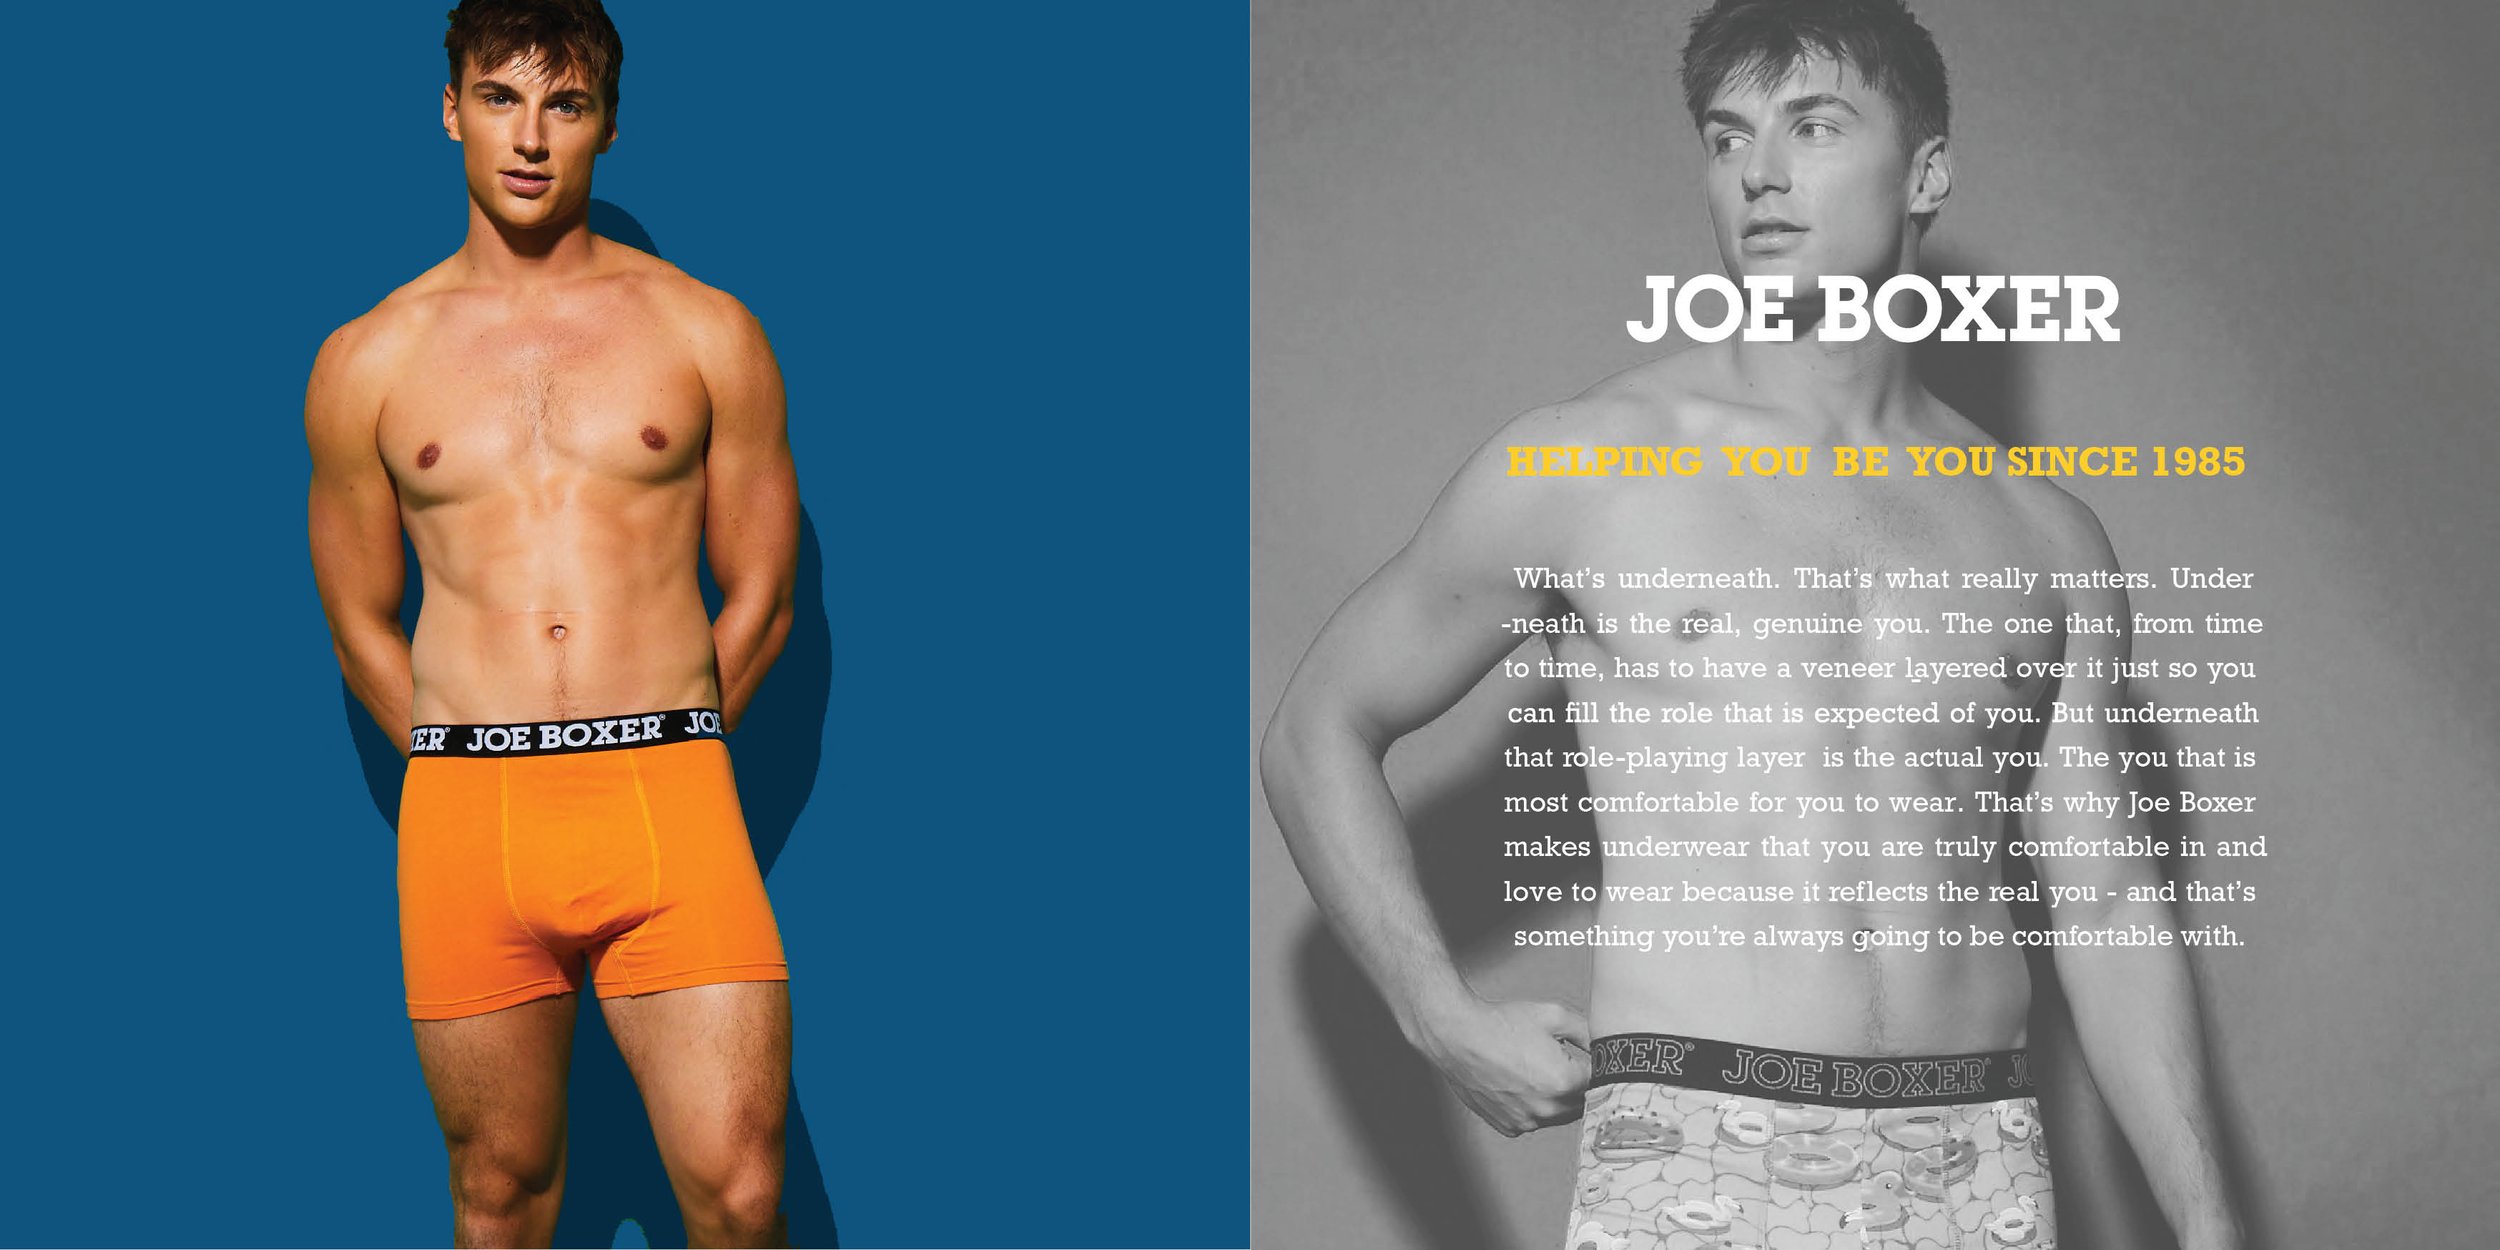 Exclusive: Joe Boxer to launch in the UK and Europe - Underlines